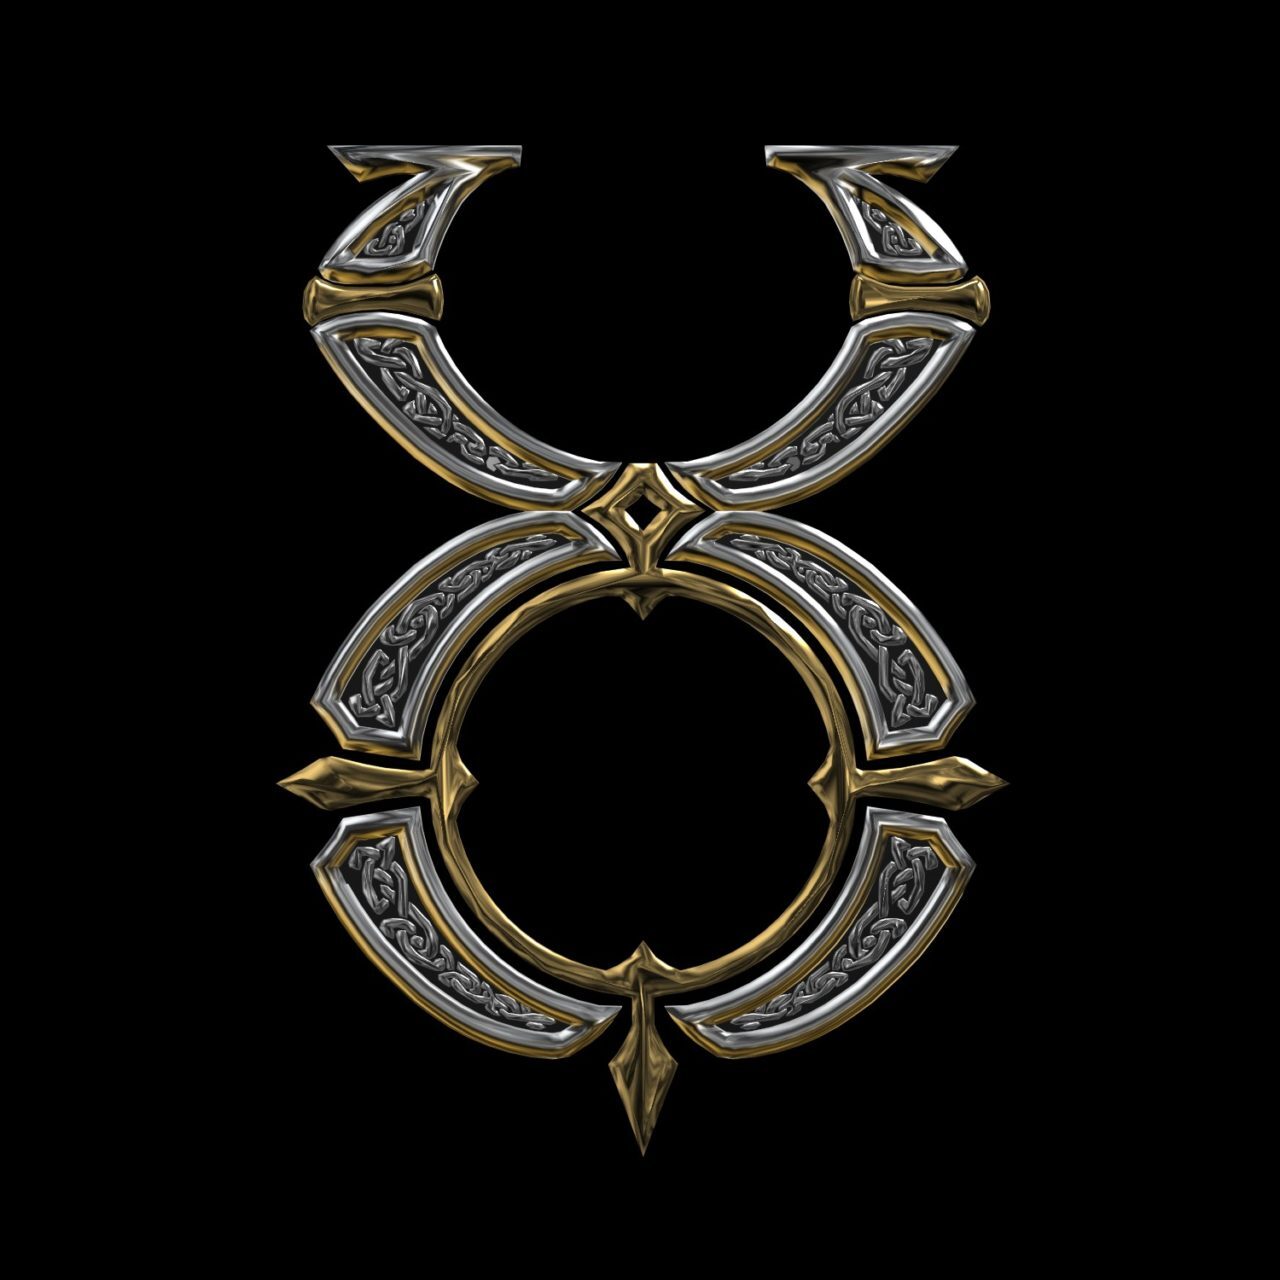 Ultima Online Private Servers